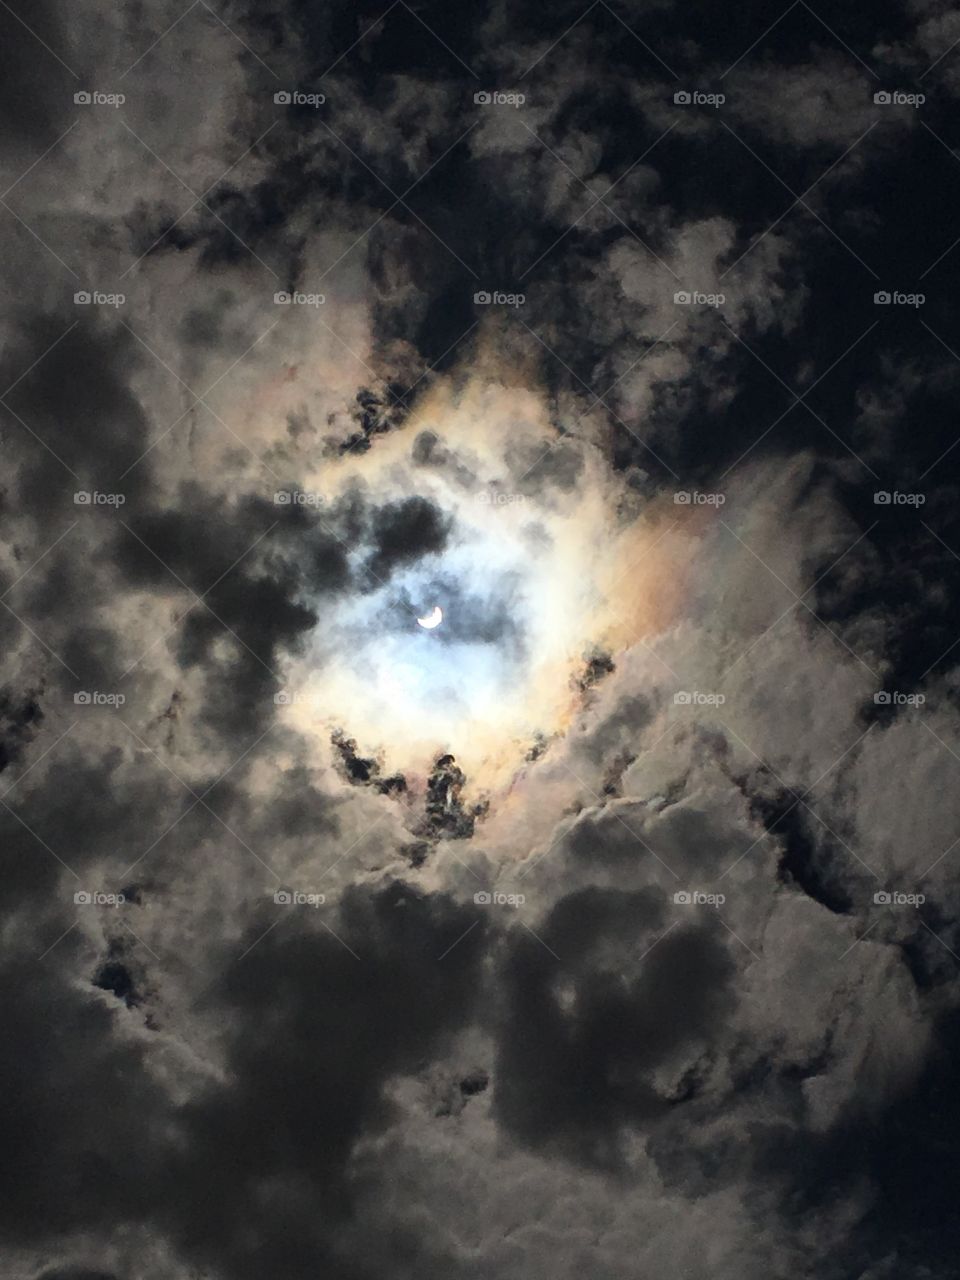 Eclipse through the clouds